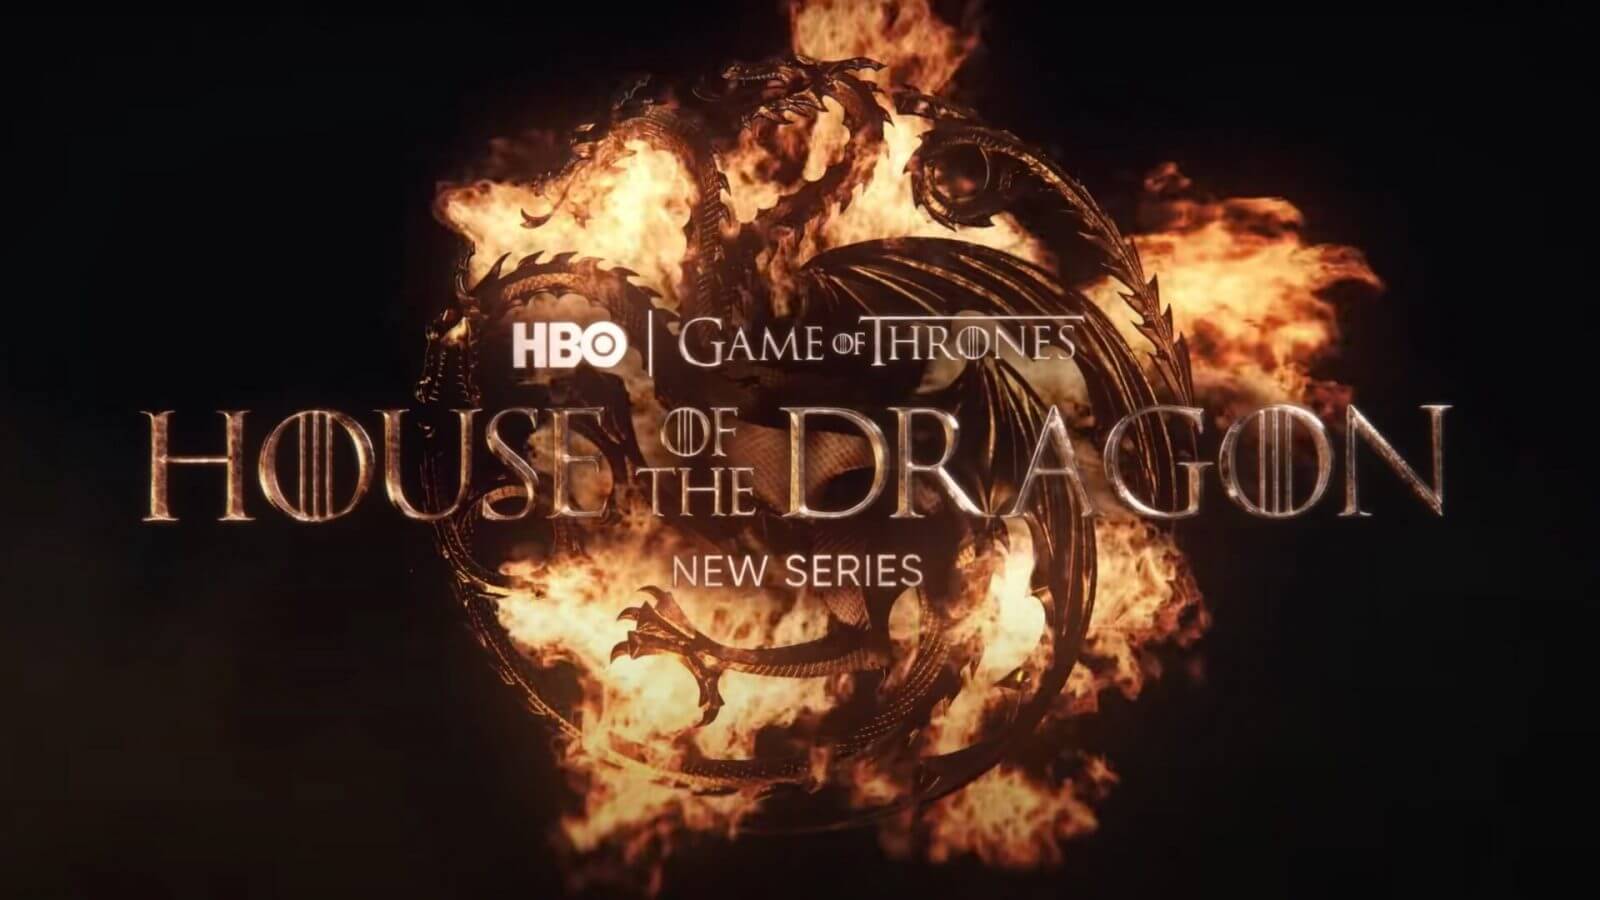 House of the Dragon, Game of Thrones prequal